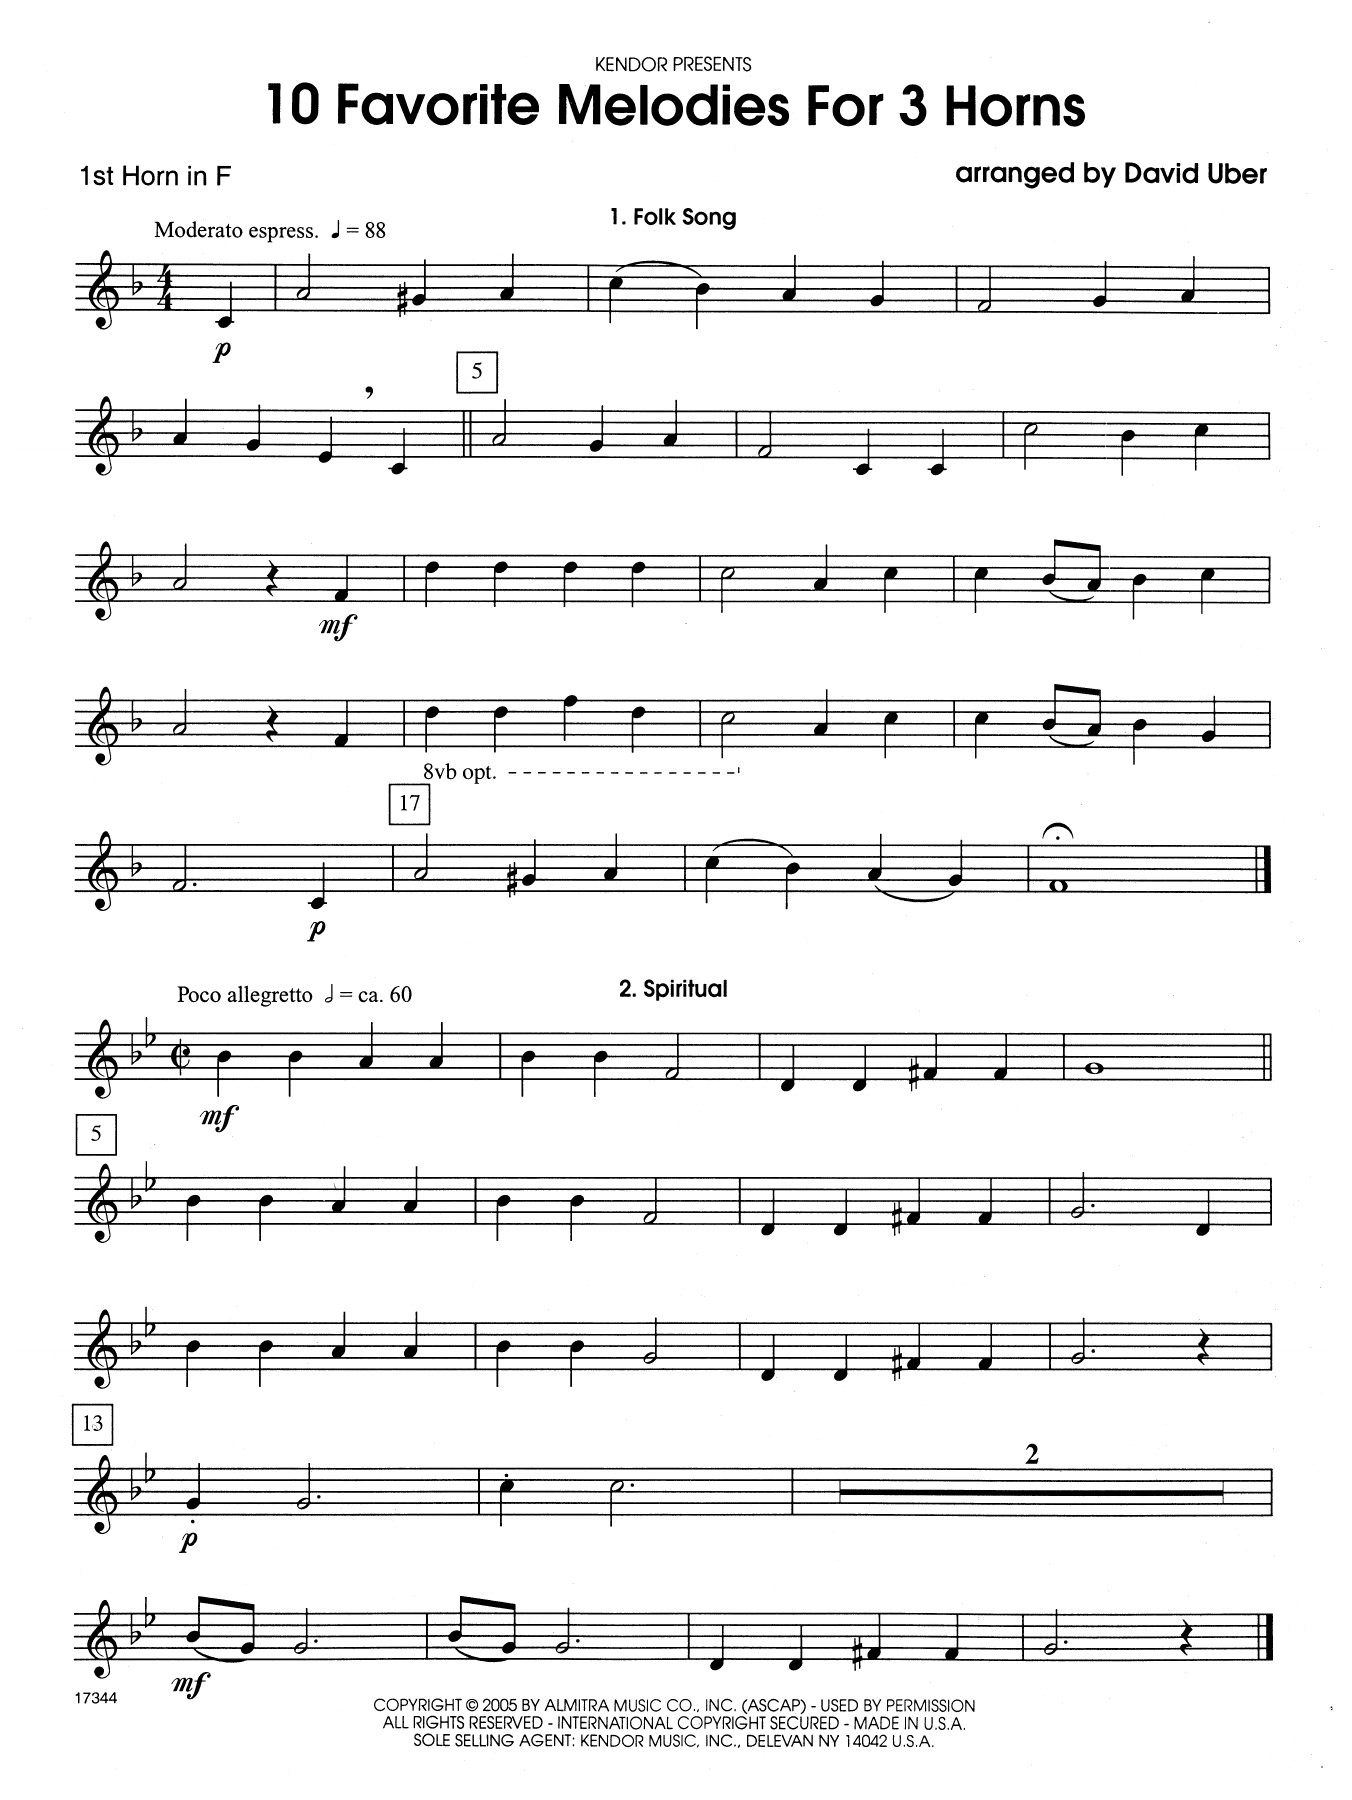 David Uber 10 Favorite Melodies For 3 Horns - 1st Horn in F sheet music notes and chords. Download Printable PDF.